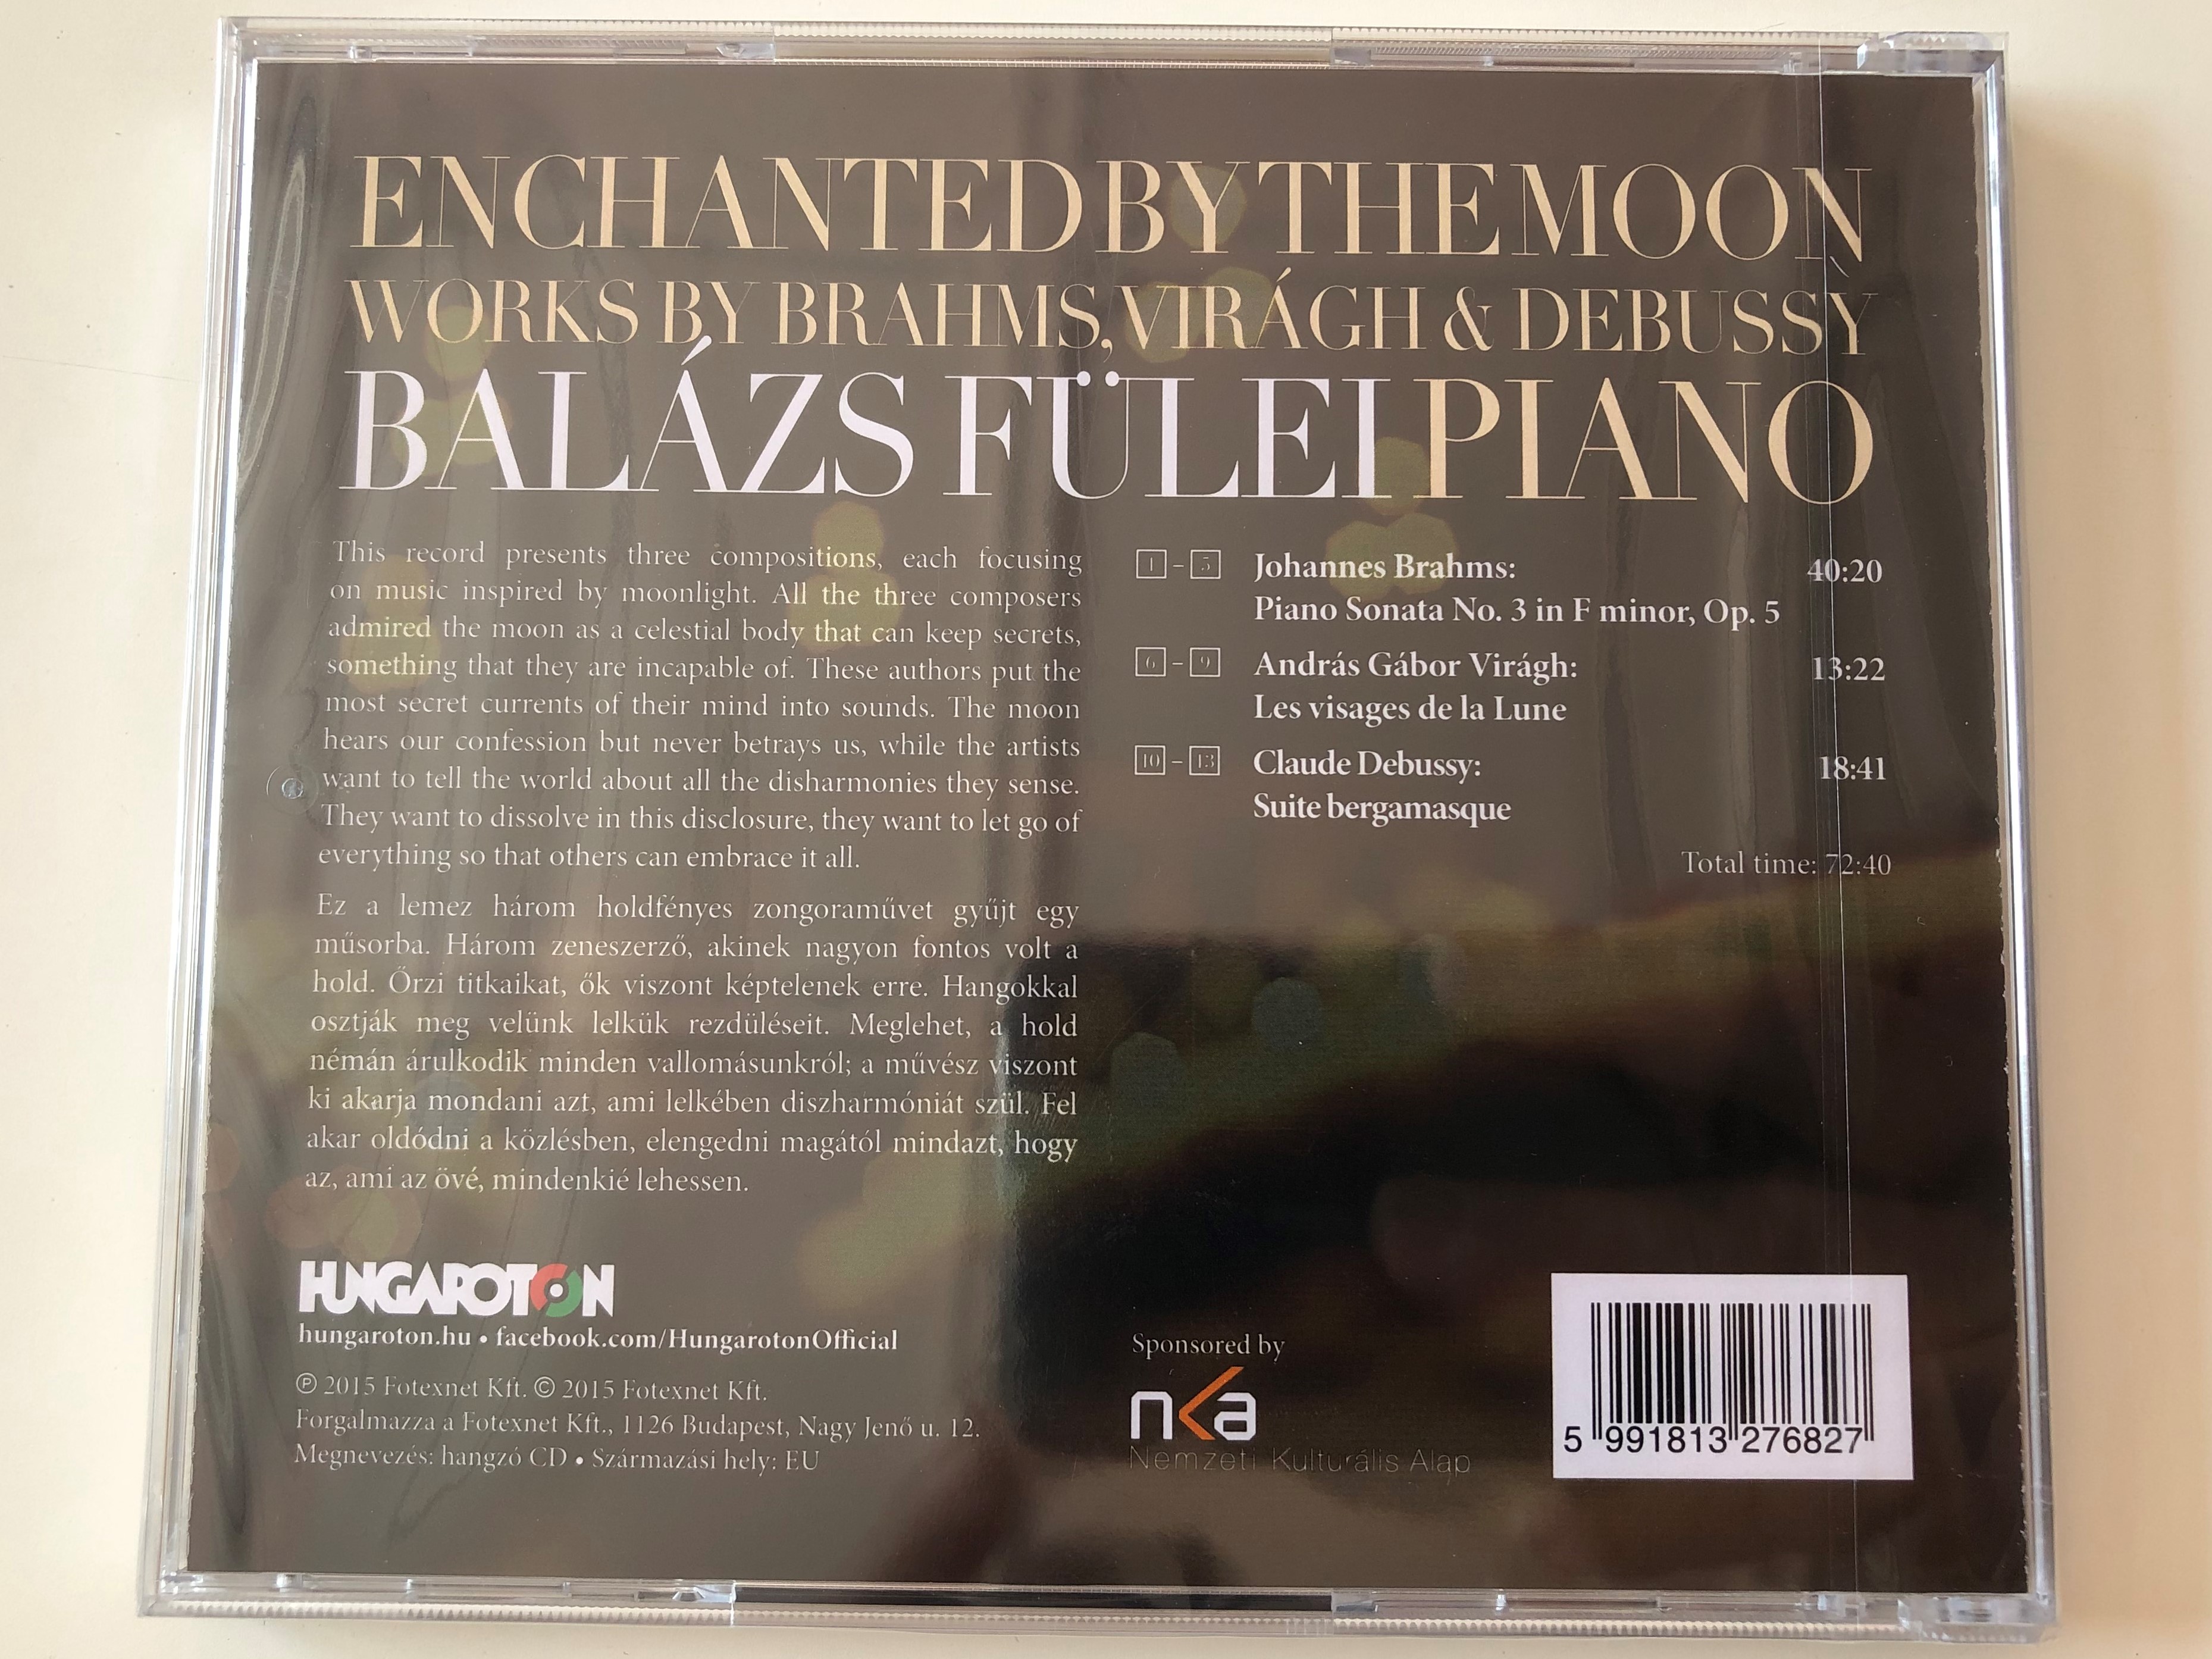 enchanted-by-the-moon-works-by-brahms-vir-gh-debussy-bal-zs-f-lei-piano-hungaroton-audio-cd-2015-5991813276827-2-.jpg